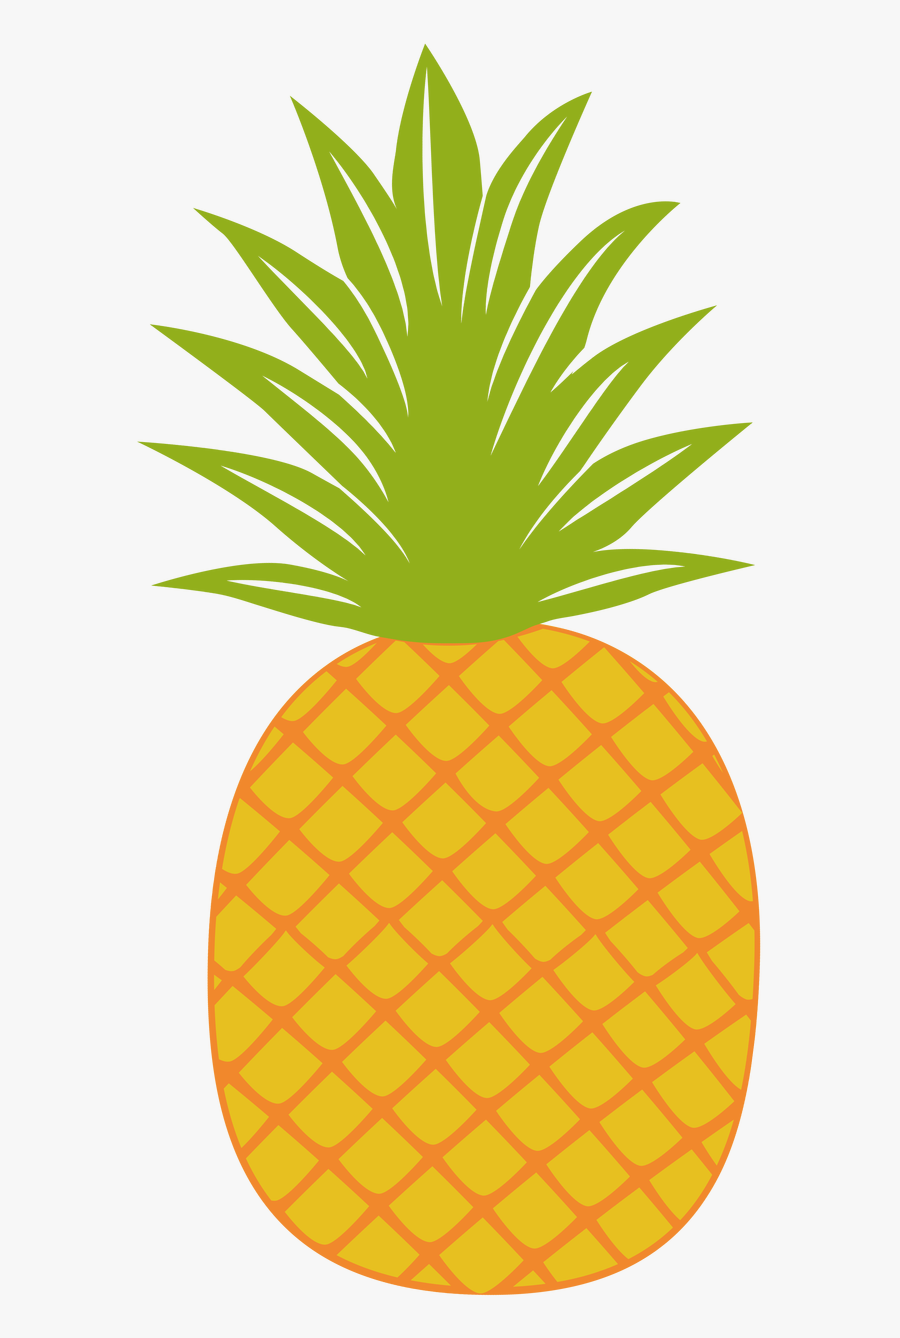 Download Pineapple Clipart - Layered SVG Cut File